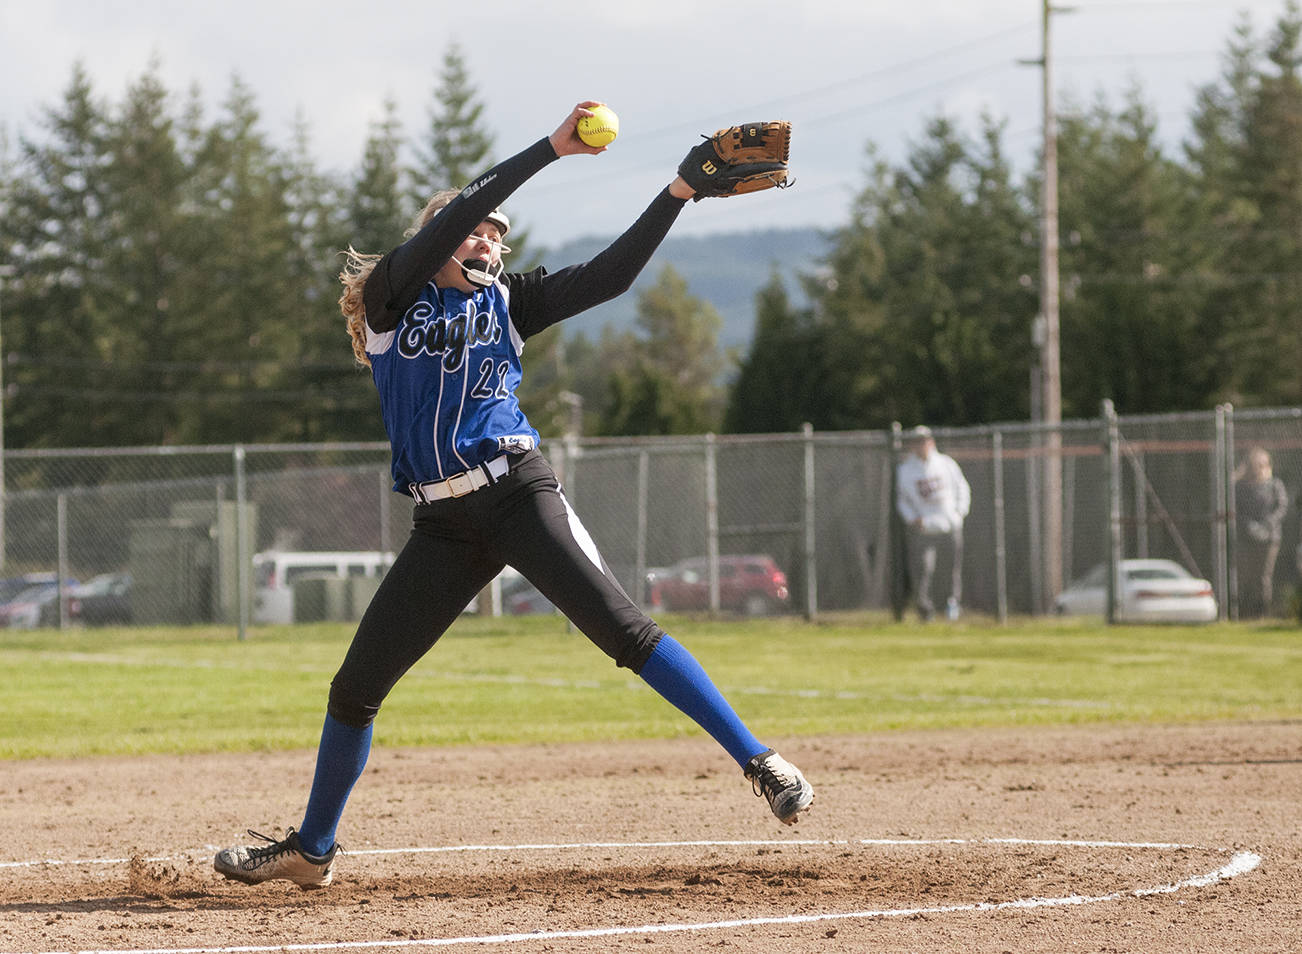 (Brendan Carl | Grays Harbor Newspaper Group ) Elma’s Quin Mikel pitches against Hoquiam on Thursday.